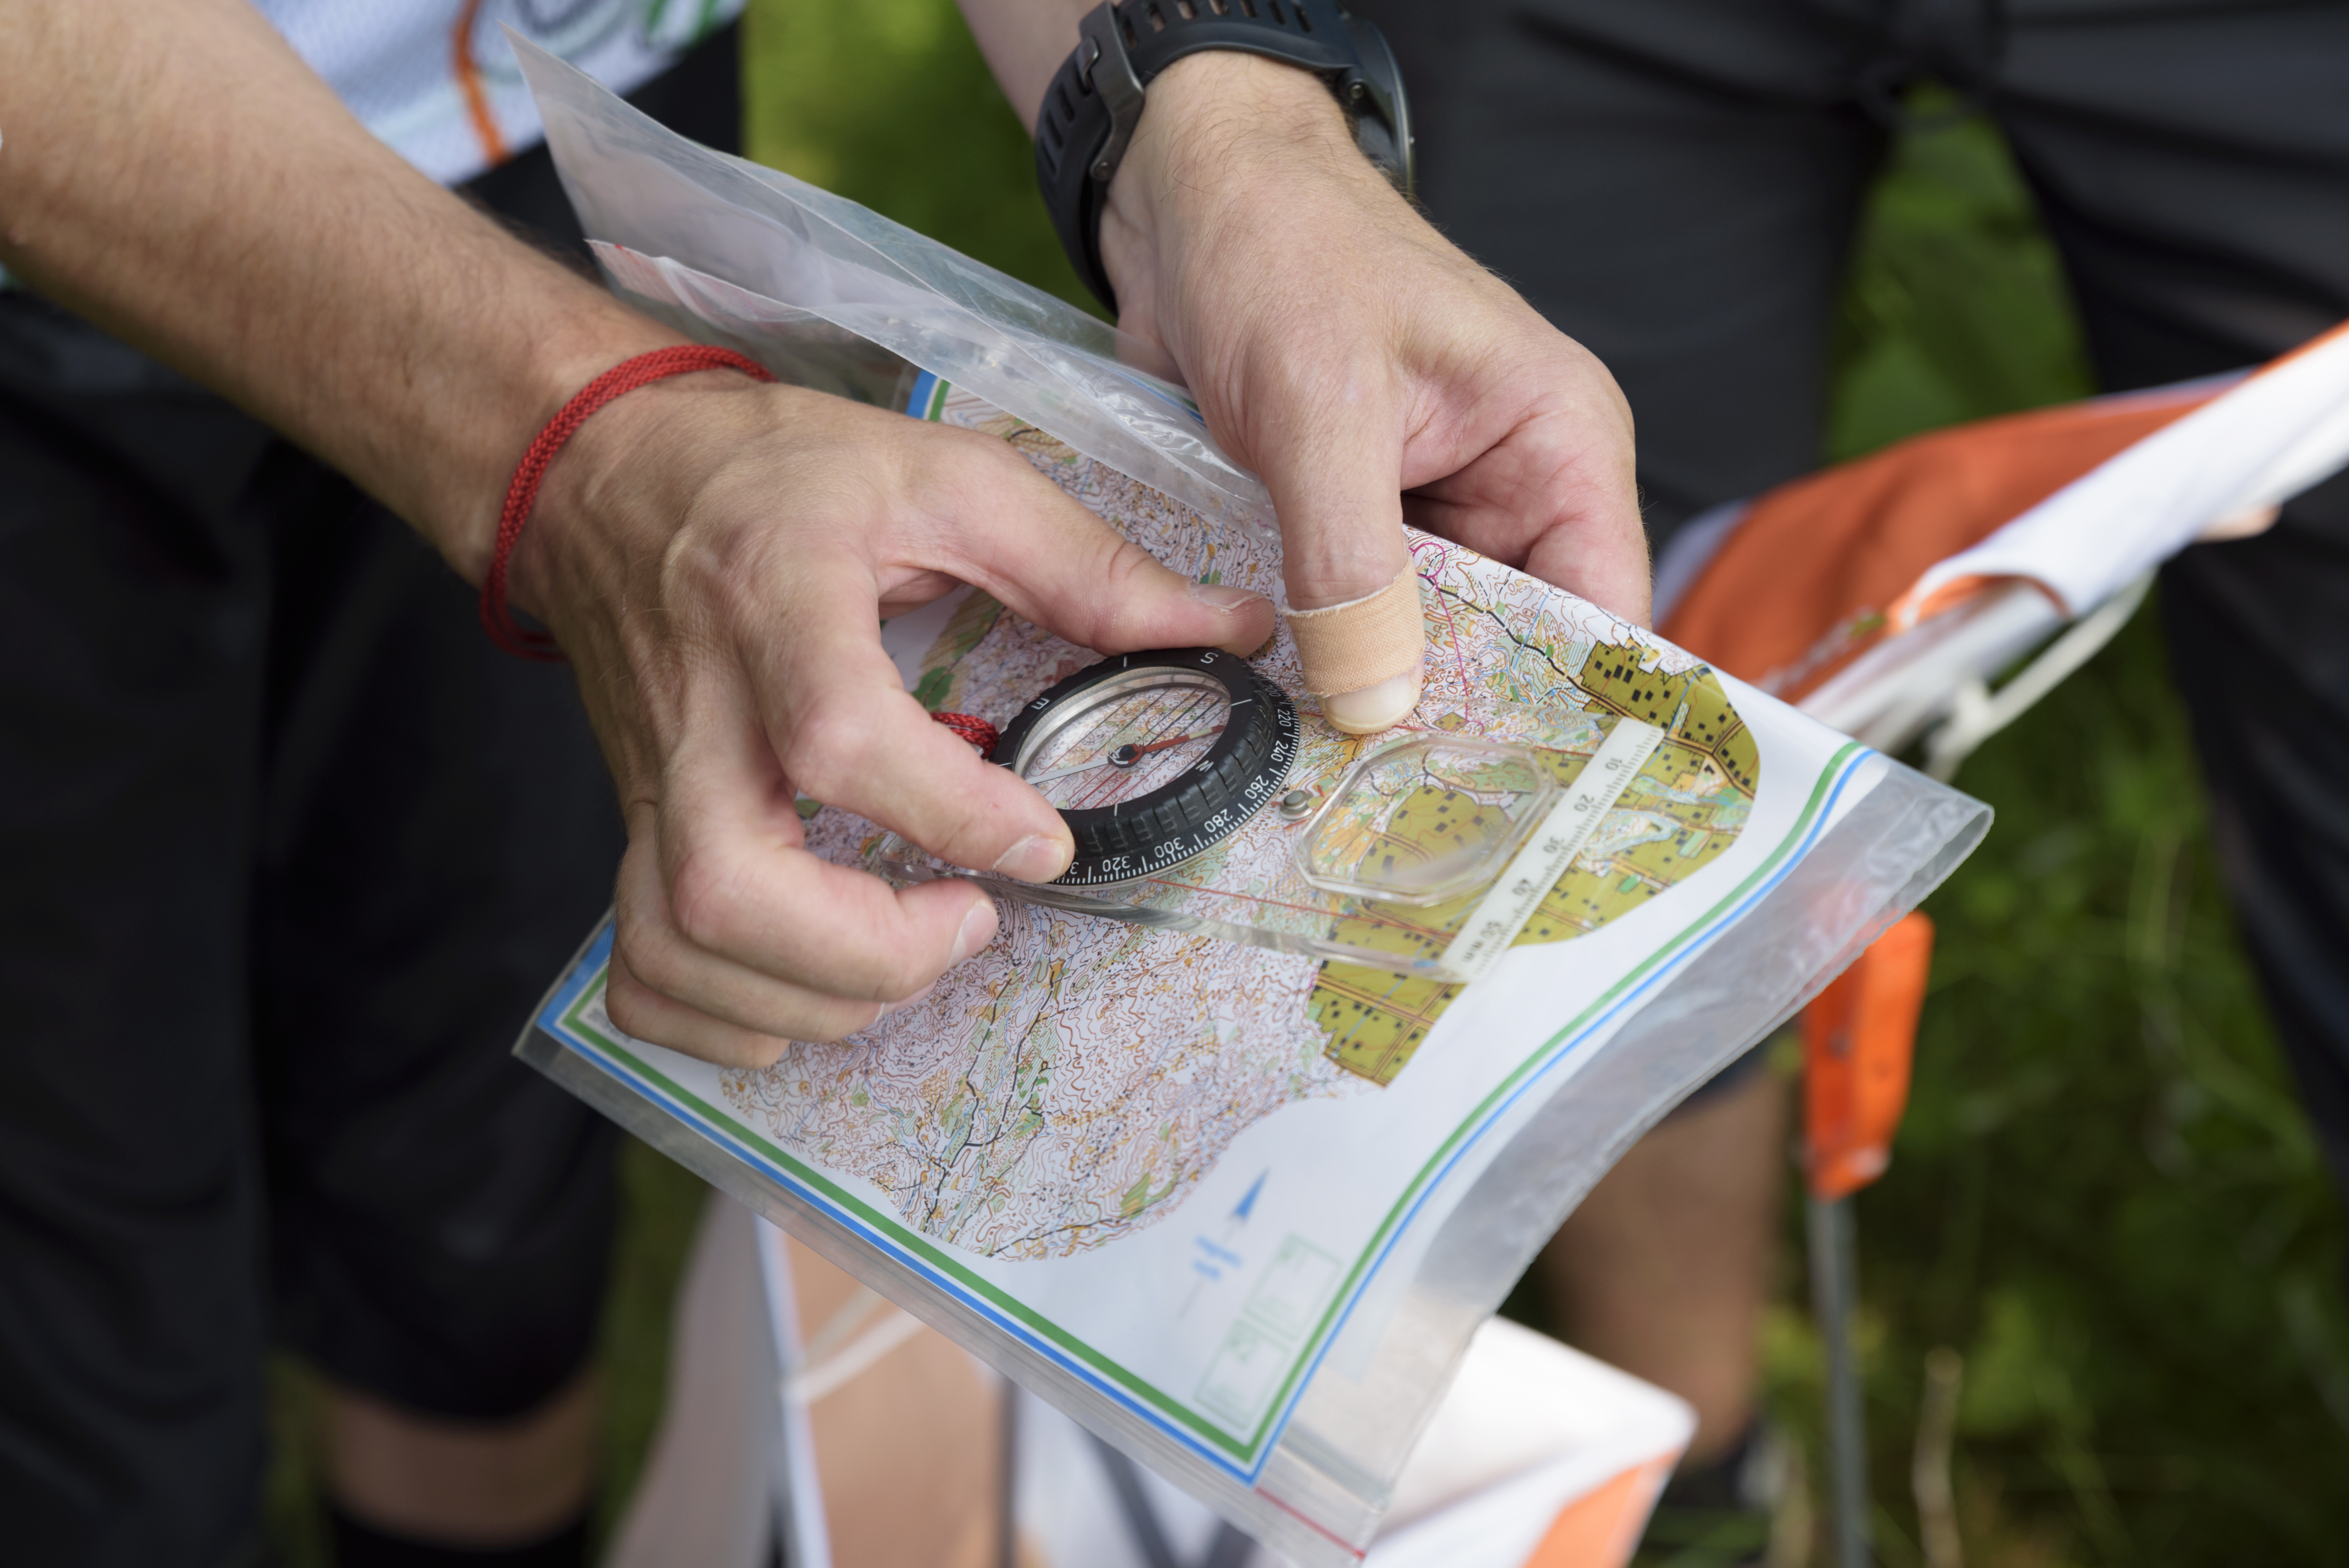 A person holds a topographical map and compass.